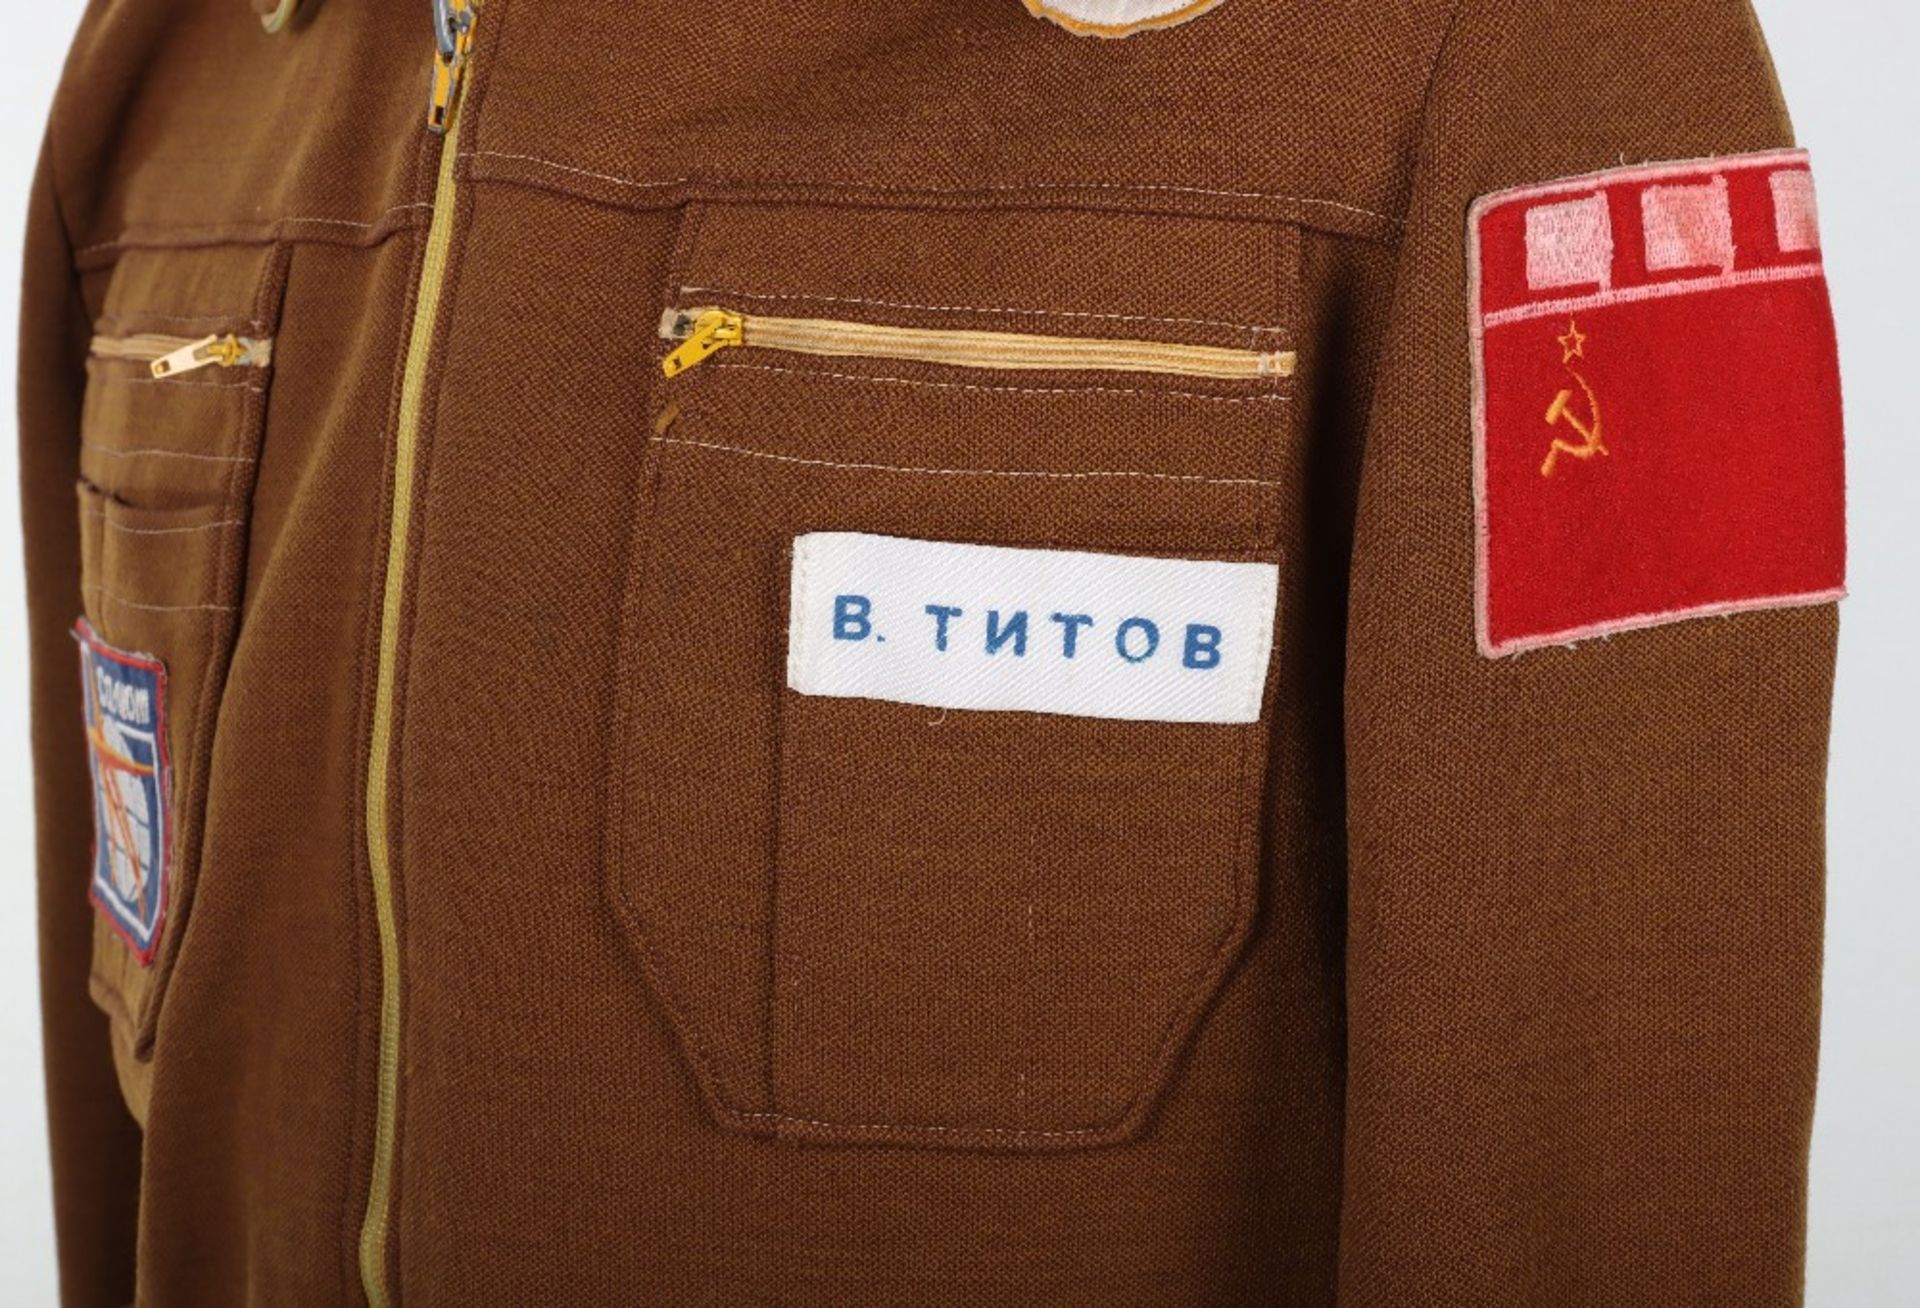 Very Unusual Soviet Russian Astronauts Flight Suit of Vladimir Titov, Who was on the Failed Mission - Image 6 of 17